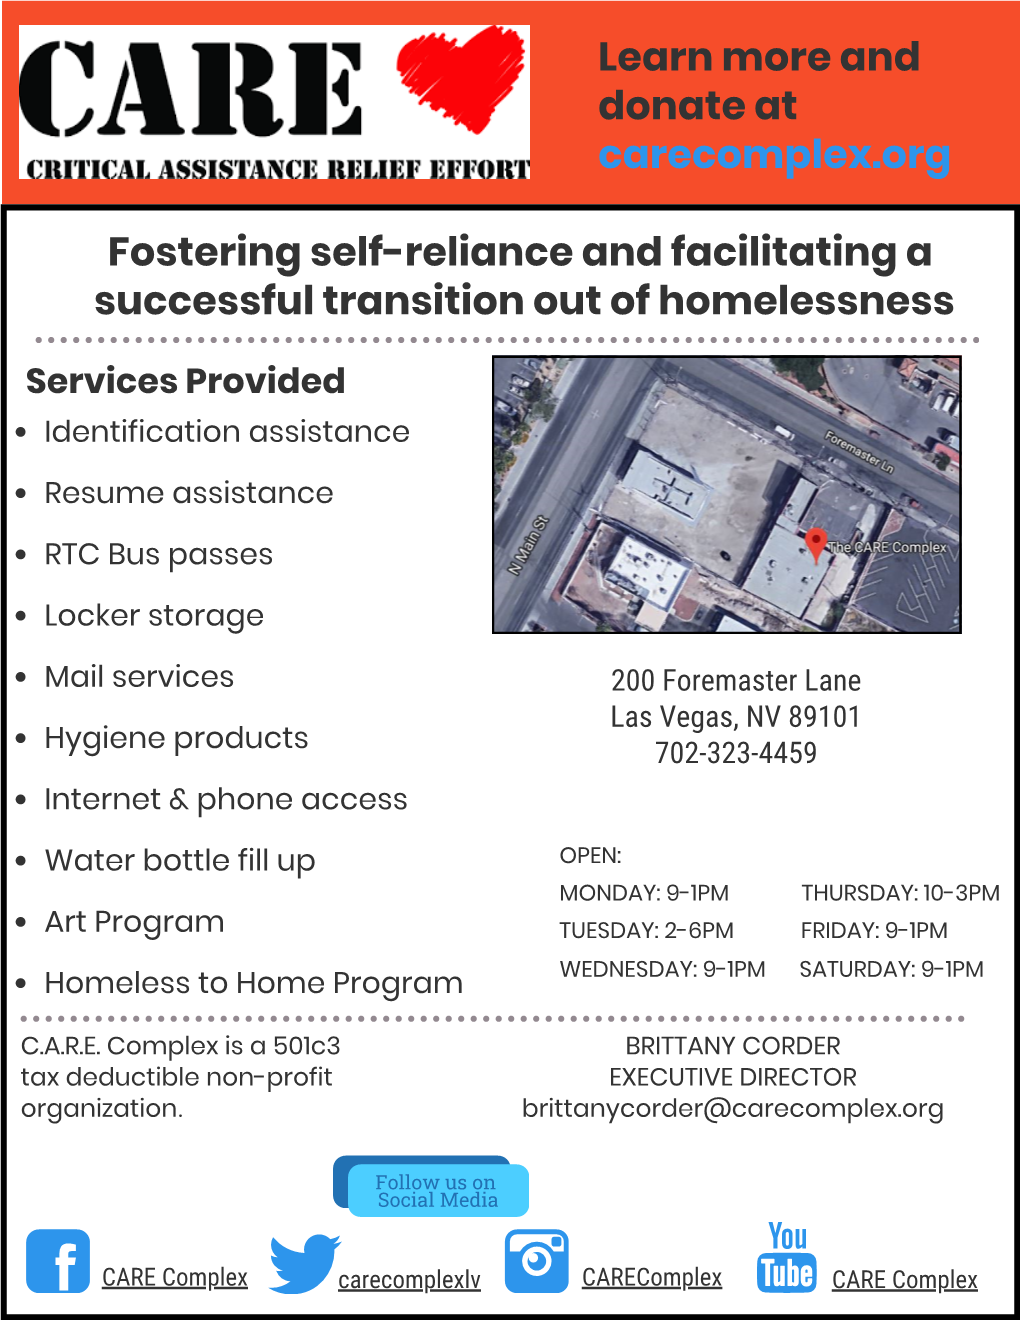 Fostering Self-Reliance and Facilitating a Successful Transition out of Homelessness